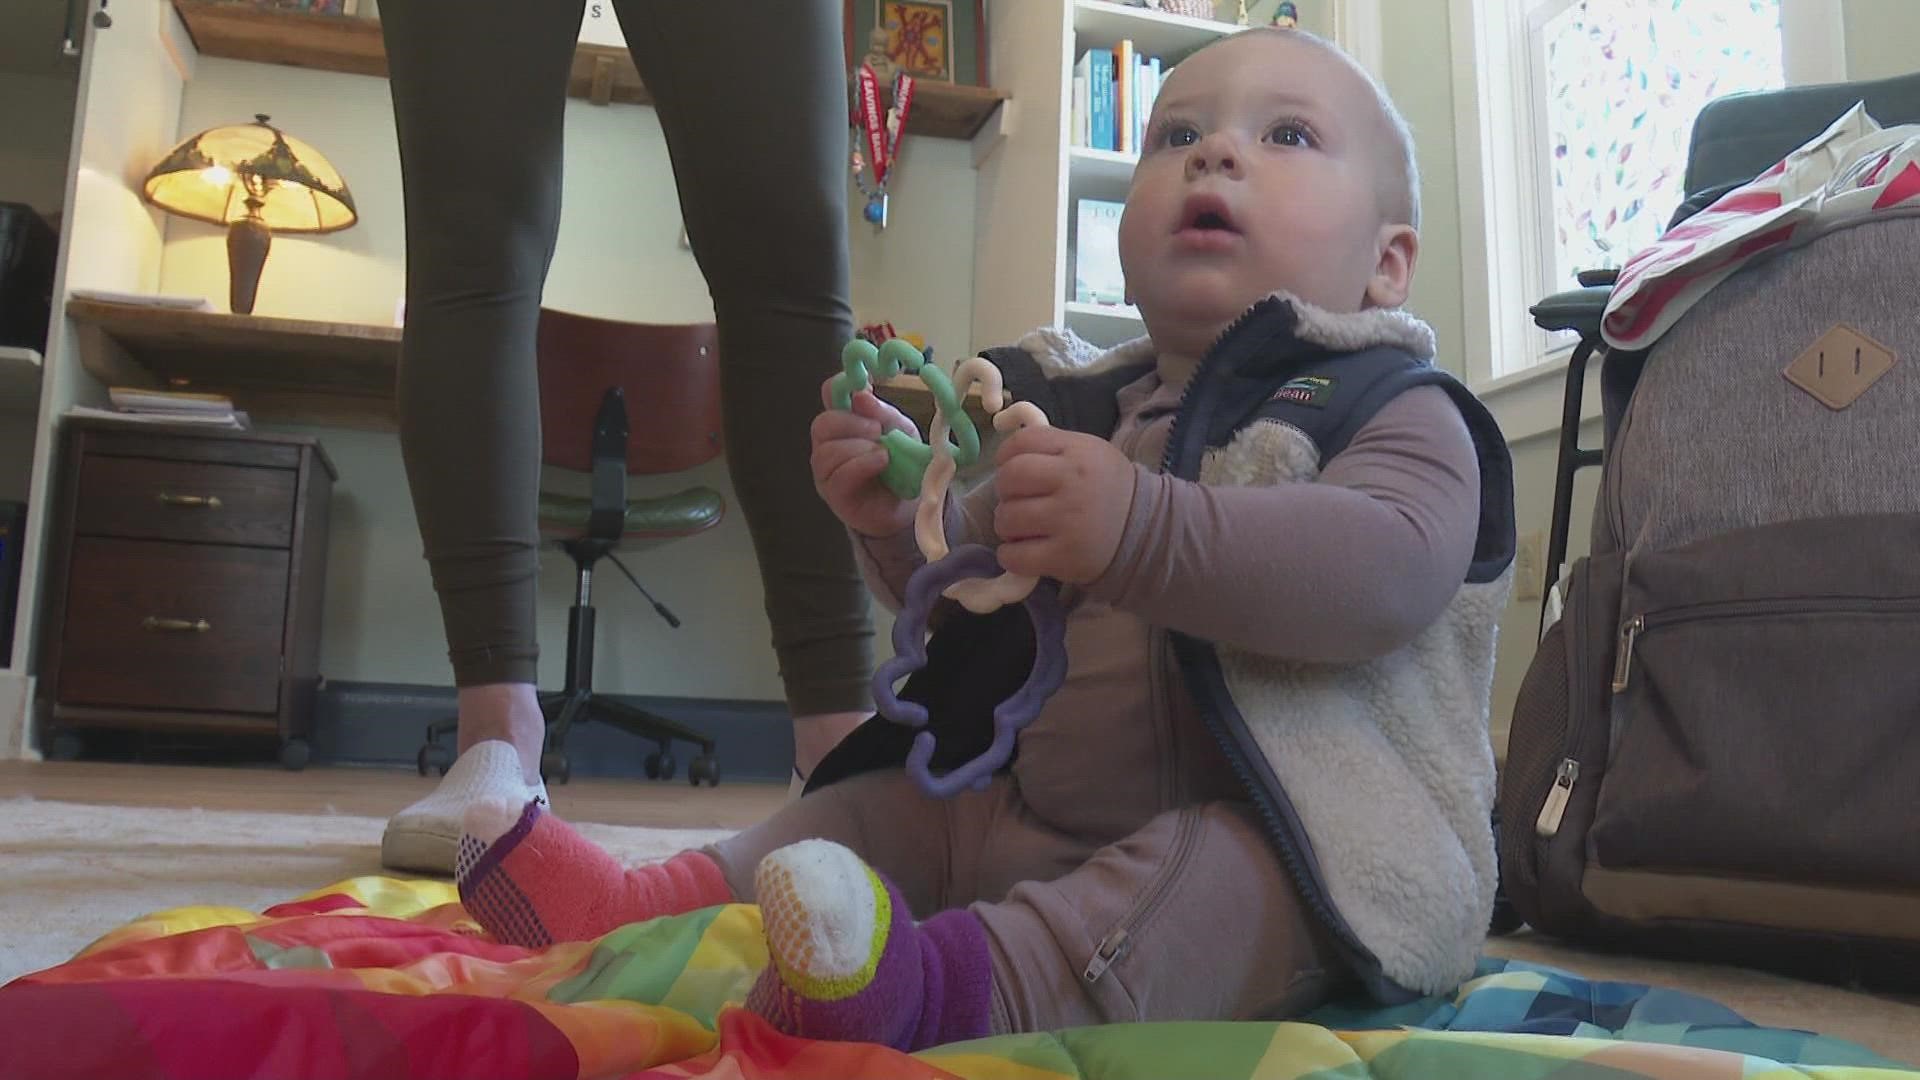 Maine doctors say they've seen double the number of infants and young kids coming to the emergency department or primary care with symptoms.